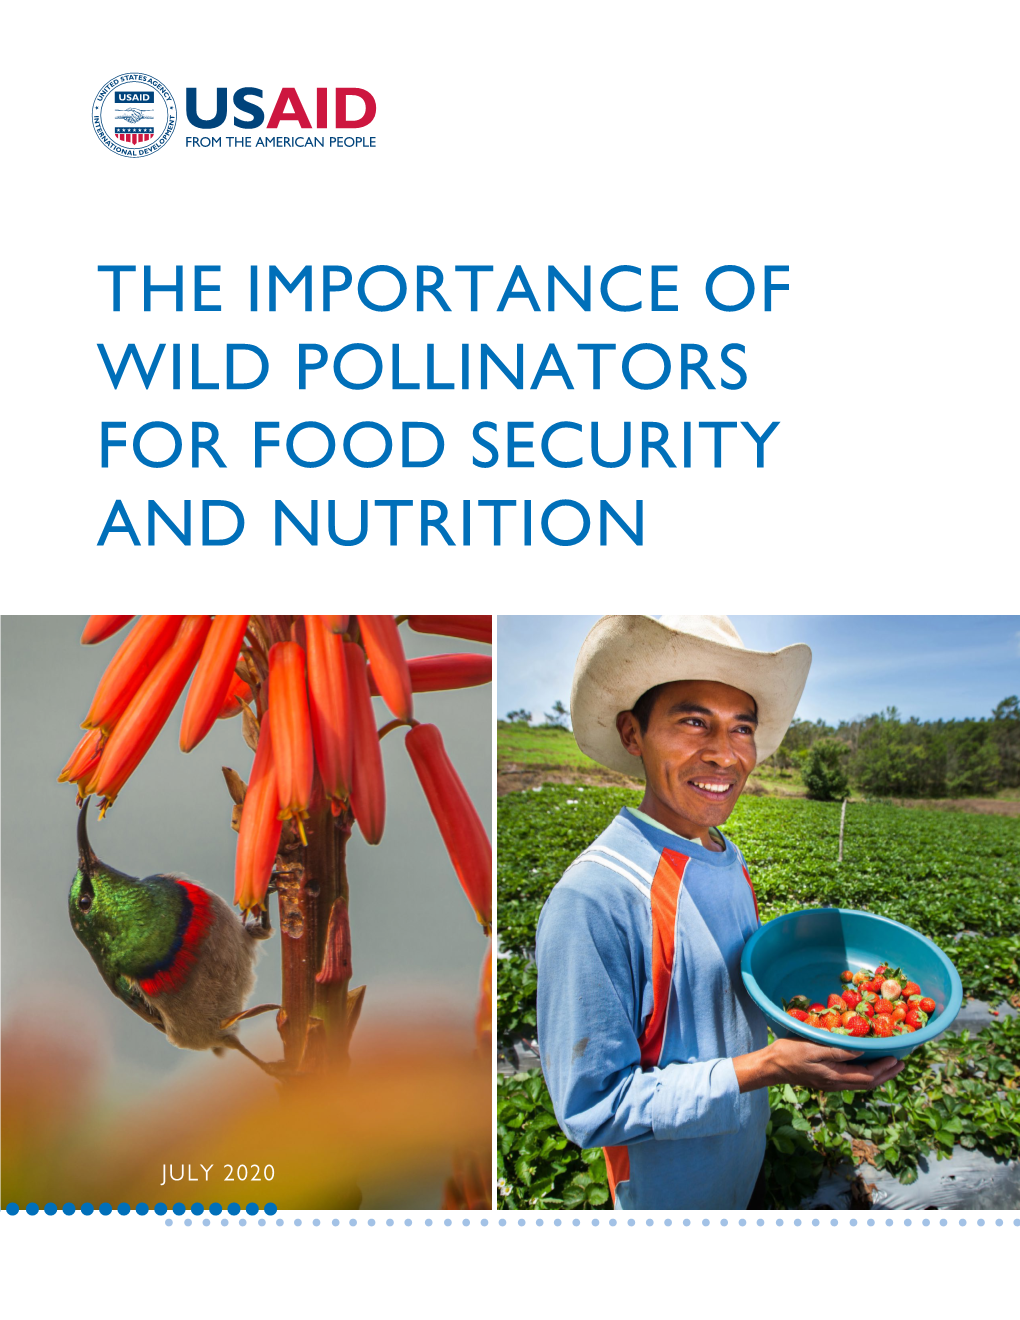 The Importance of Wild Pollinators for Food Security and Nutrition